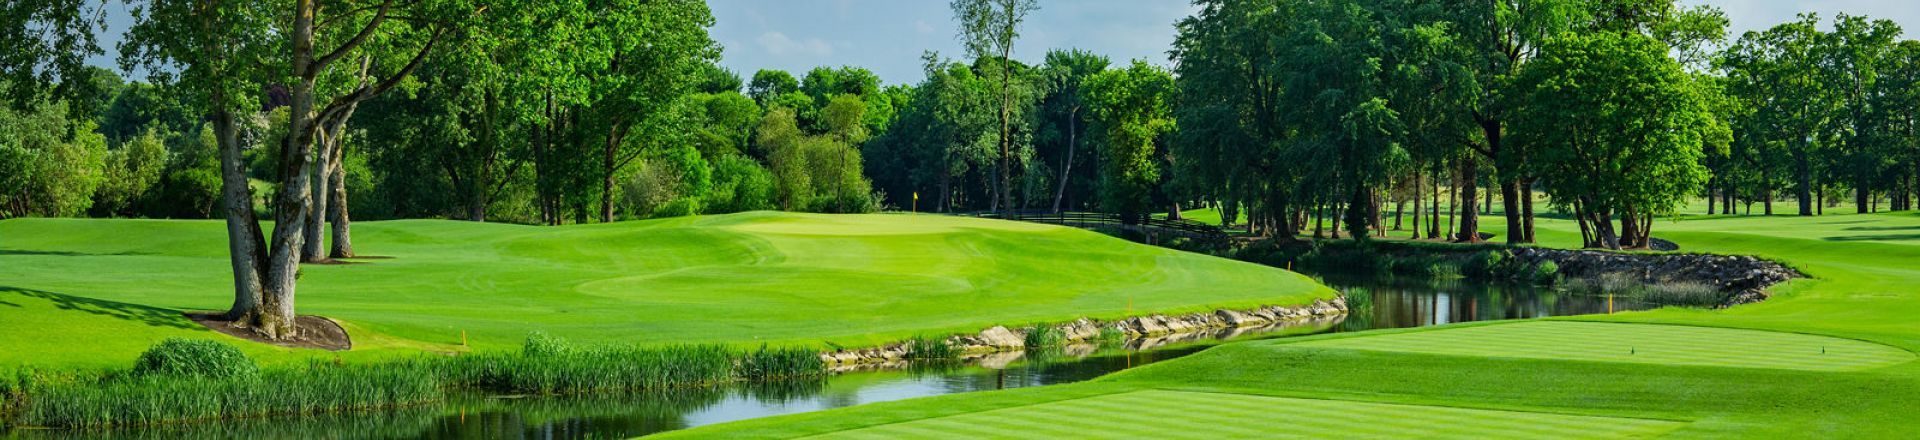 Play golf in Ireland at Adare Manor Golf Course